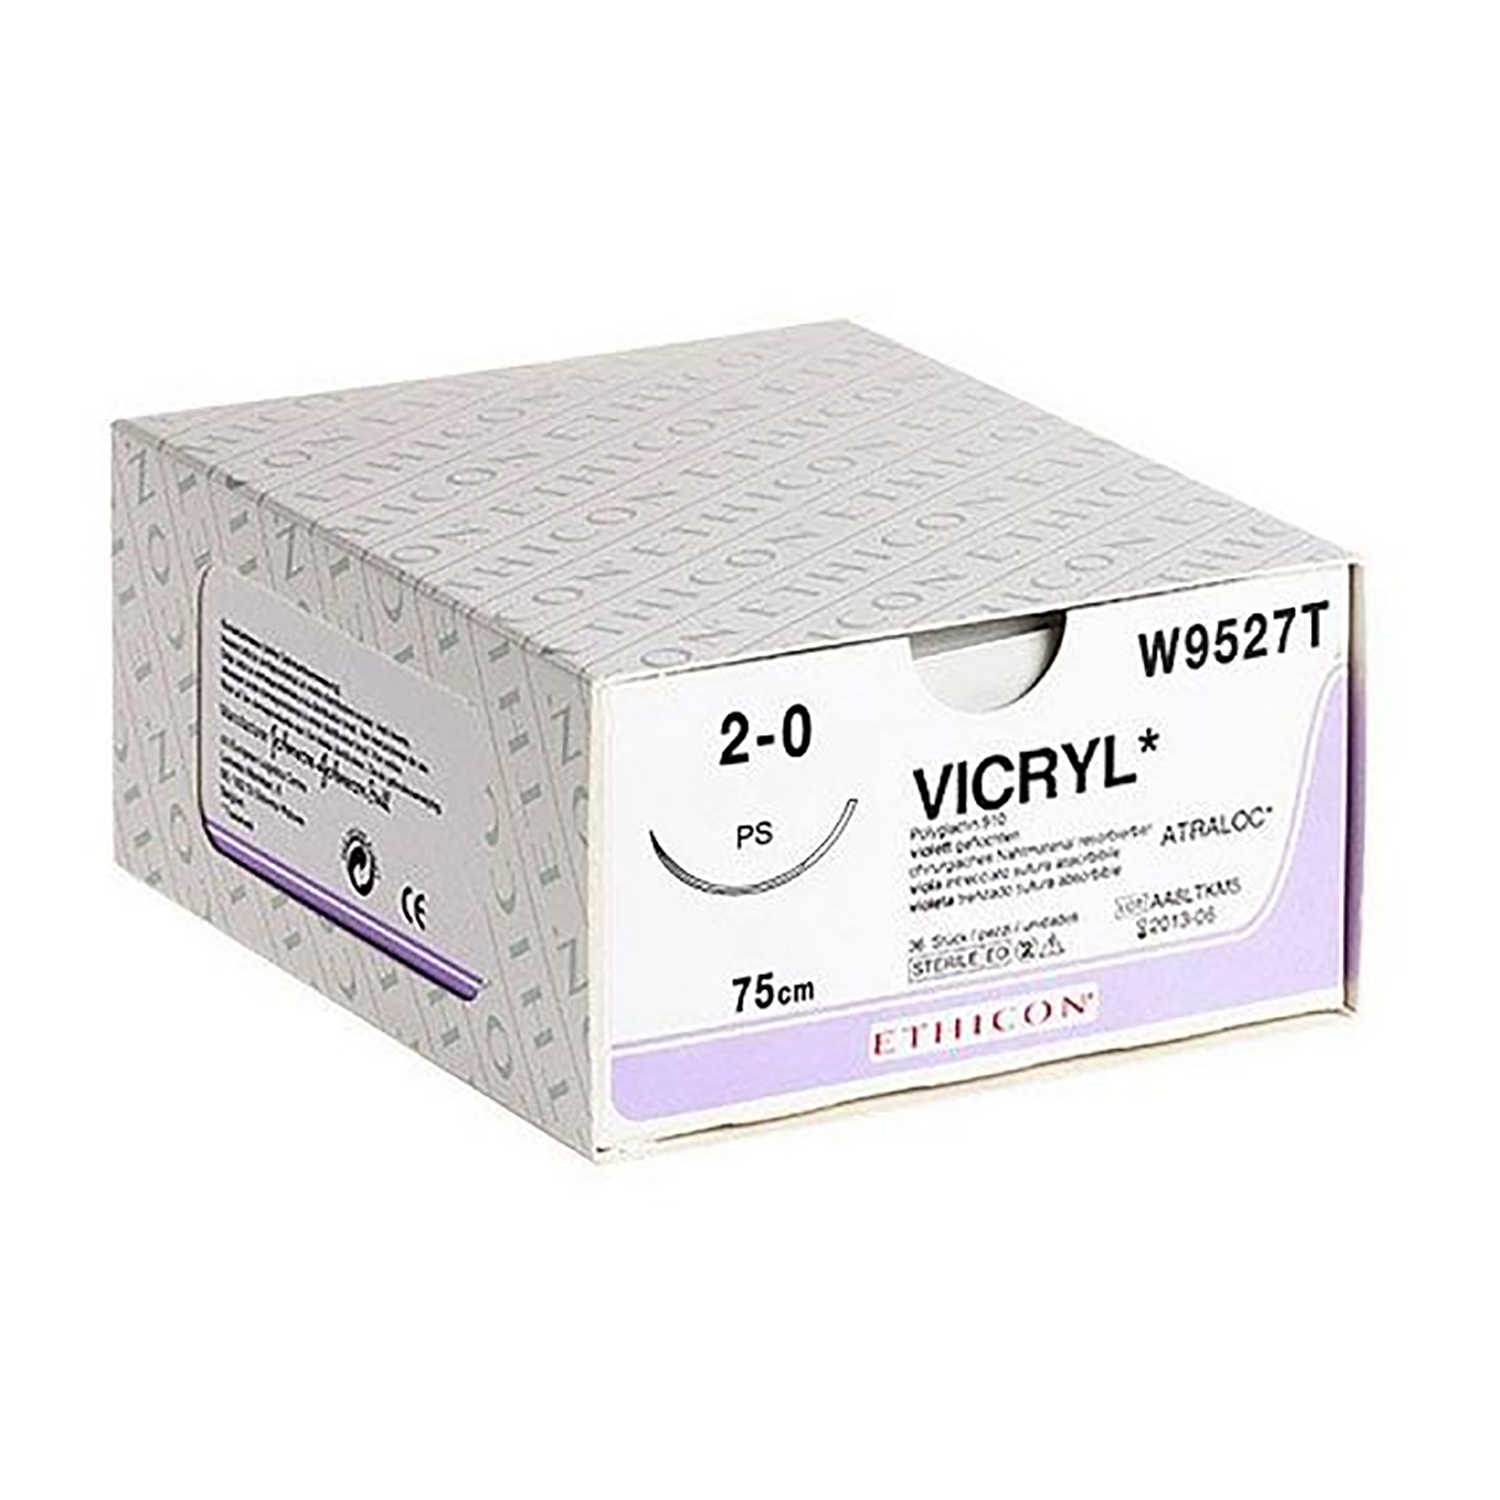 Ethicon Coated Vicryl Suture | Absorbable | Undyed | Suture Size: 2-0 | Length: 75cm | Needle: PS | Pack of 24 (1)